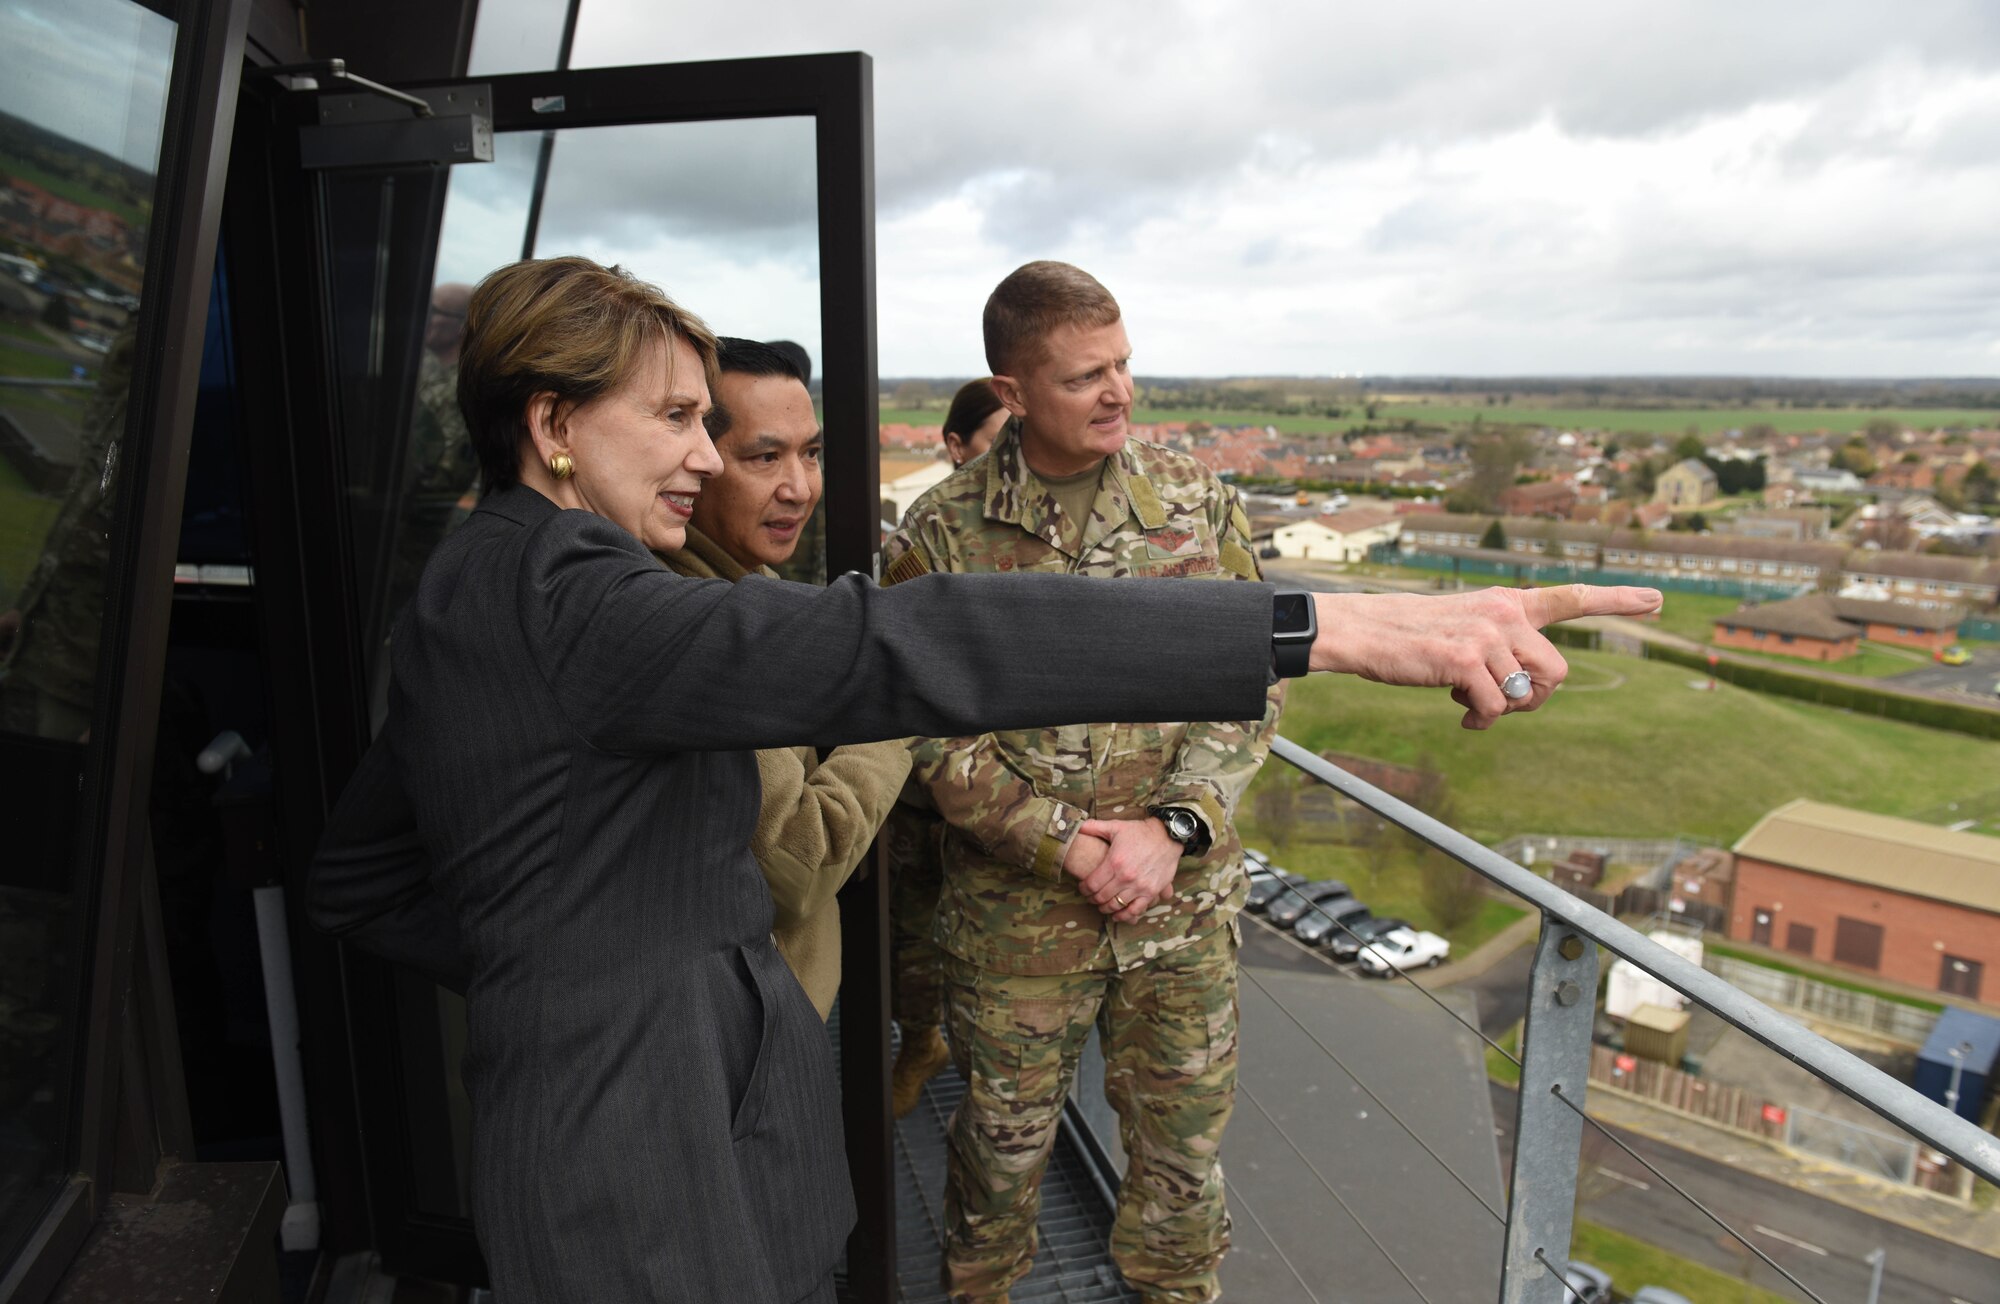 Secretary of the Air Force Barbara Barrett looks out over the base and surrounding community with Col. Troy Pananon, 100th Air Refueling Wing commander, and Col. Clay Freeman, 352 Special Operations Wing commander, atop the air traffic control tower during her visit to RAF Mildenhall, England, Feb. 13, 2020. During Barrett’s visit she spoke to members of RAF Mildenhall about Team Mildenhall’s mission, Air Force modernization and listen to their innovative ideas on how to improve the base. (U.S. Air Force photo by Staff Sgt. Luke Milano)